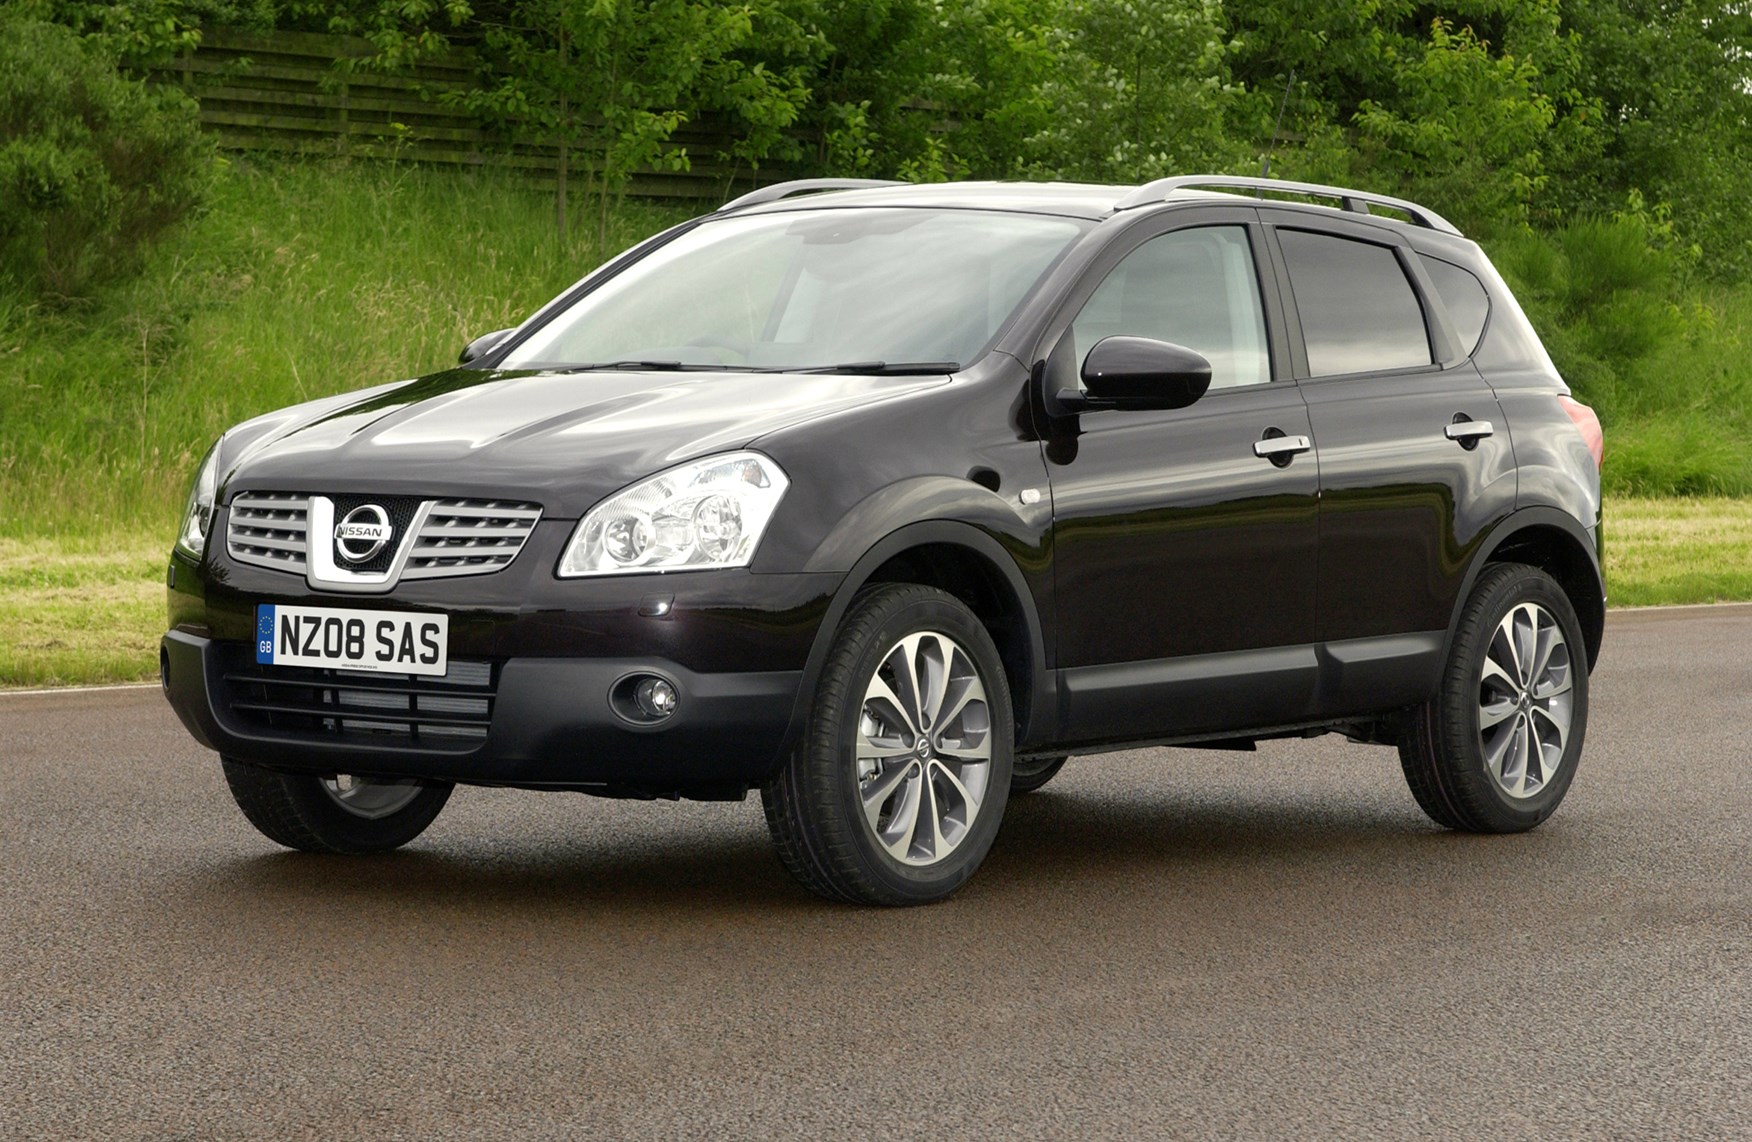 Nissan Qashqai Station Wagon Review (2007 2013) Parkers